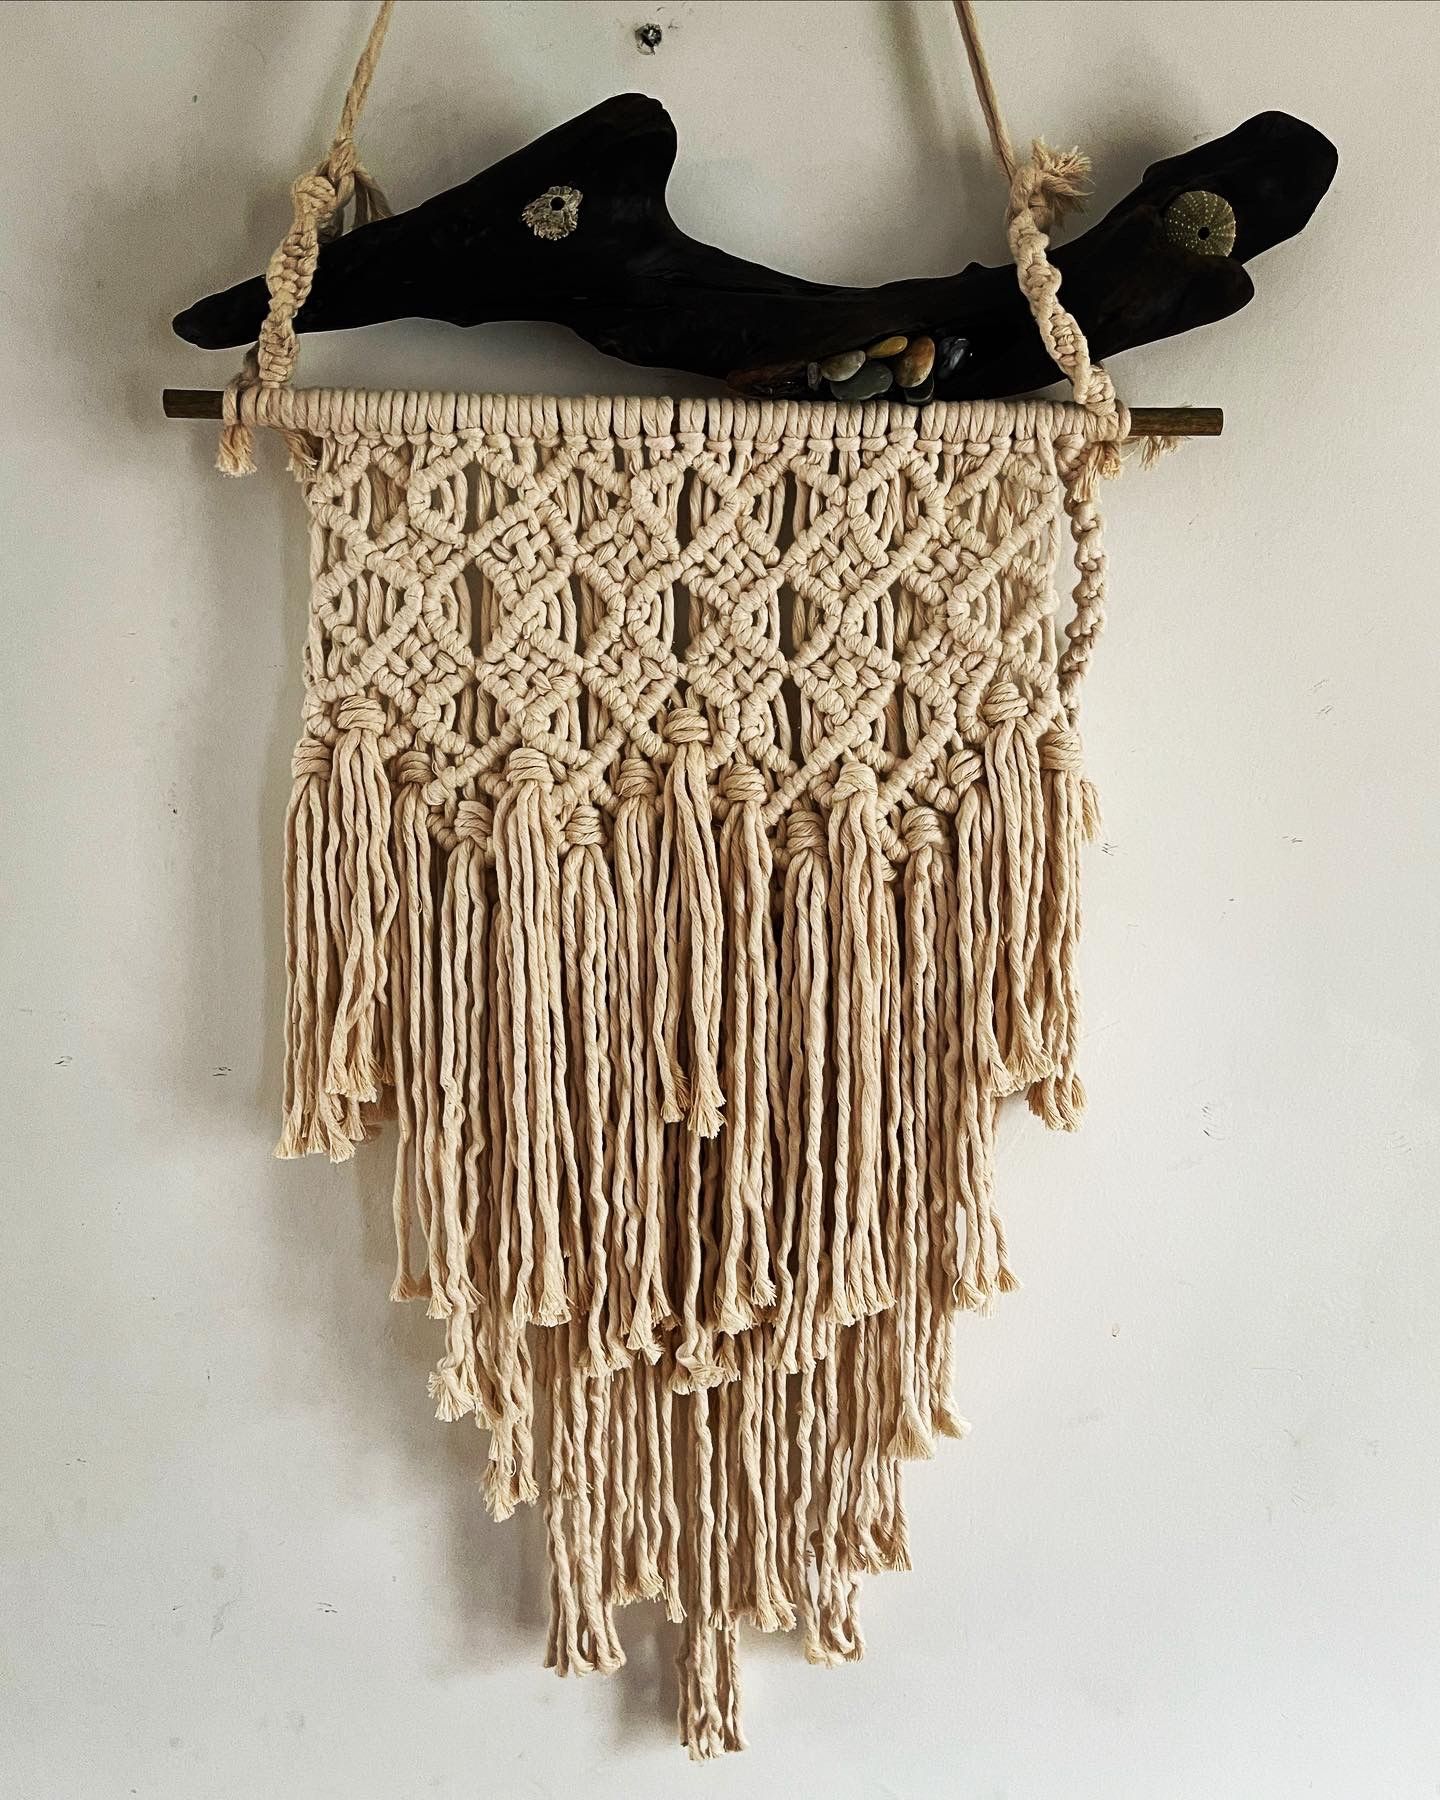 Macrame/ Mother’s Day/ Home Deco/ Driftwood